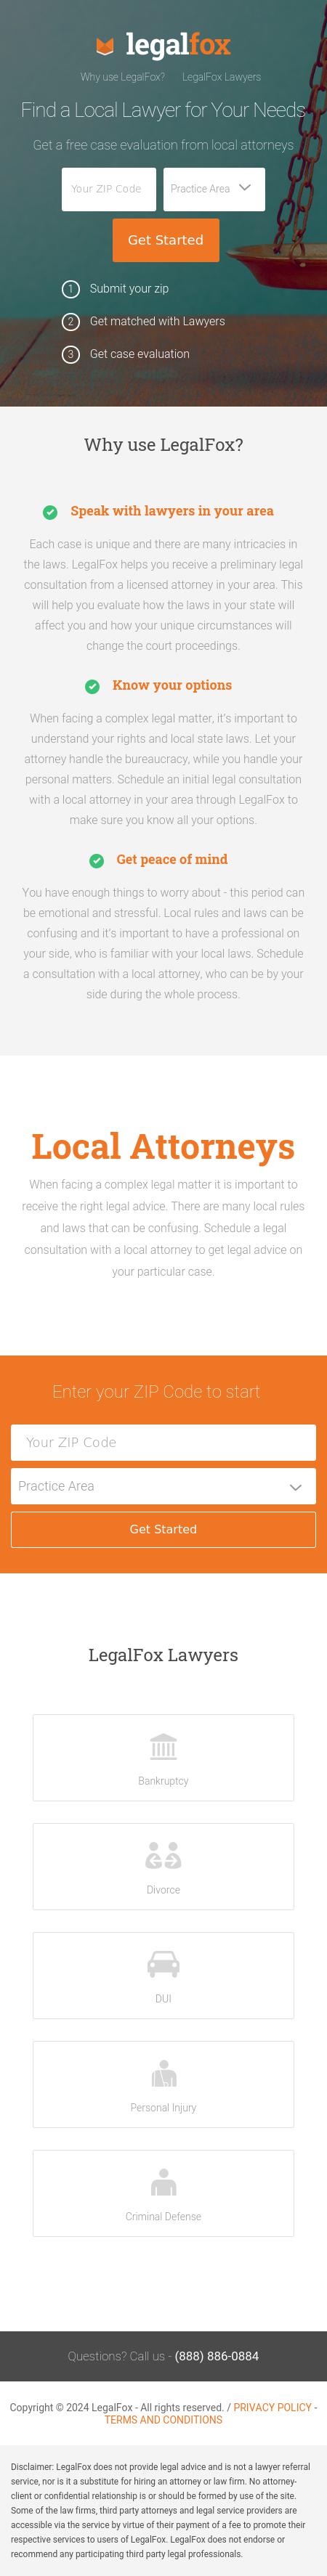 Find a Local Attorney - Temple TX Lawyers